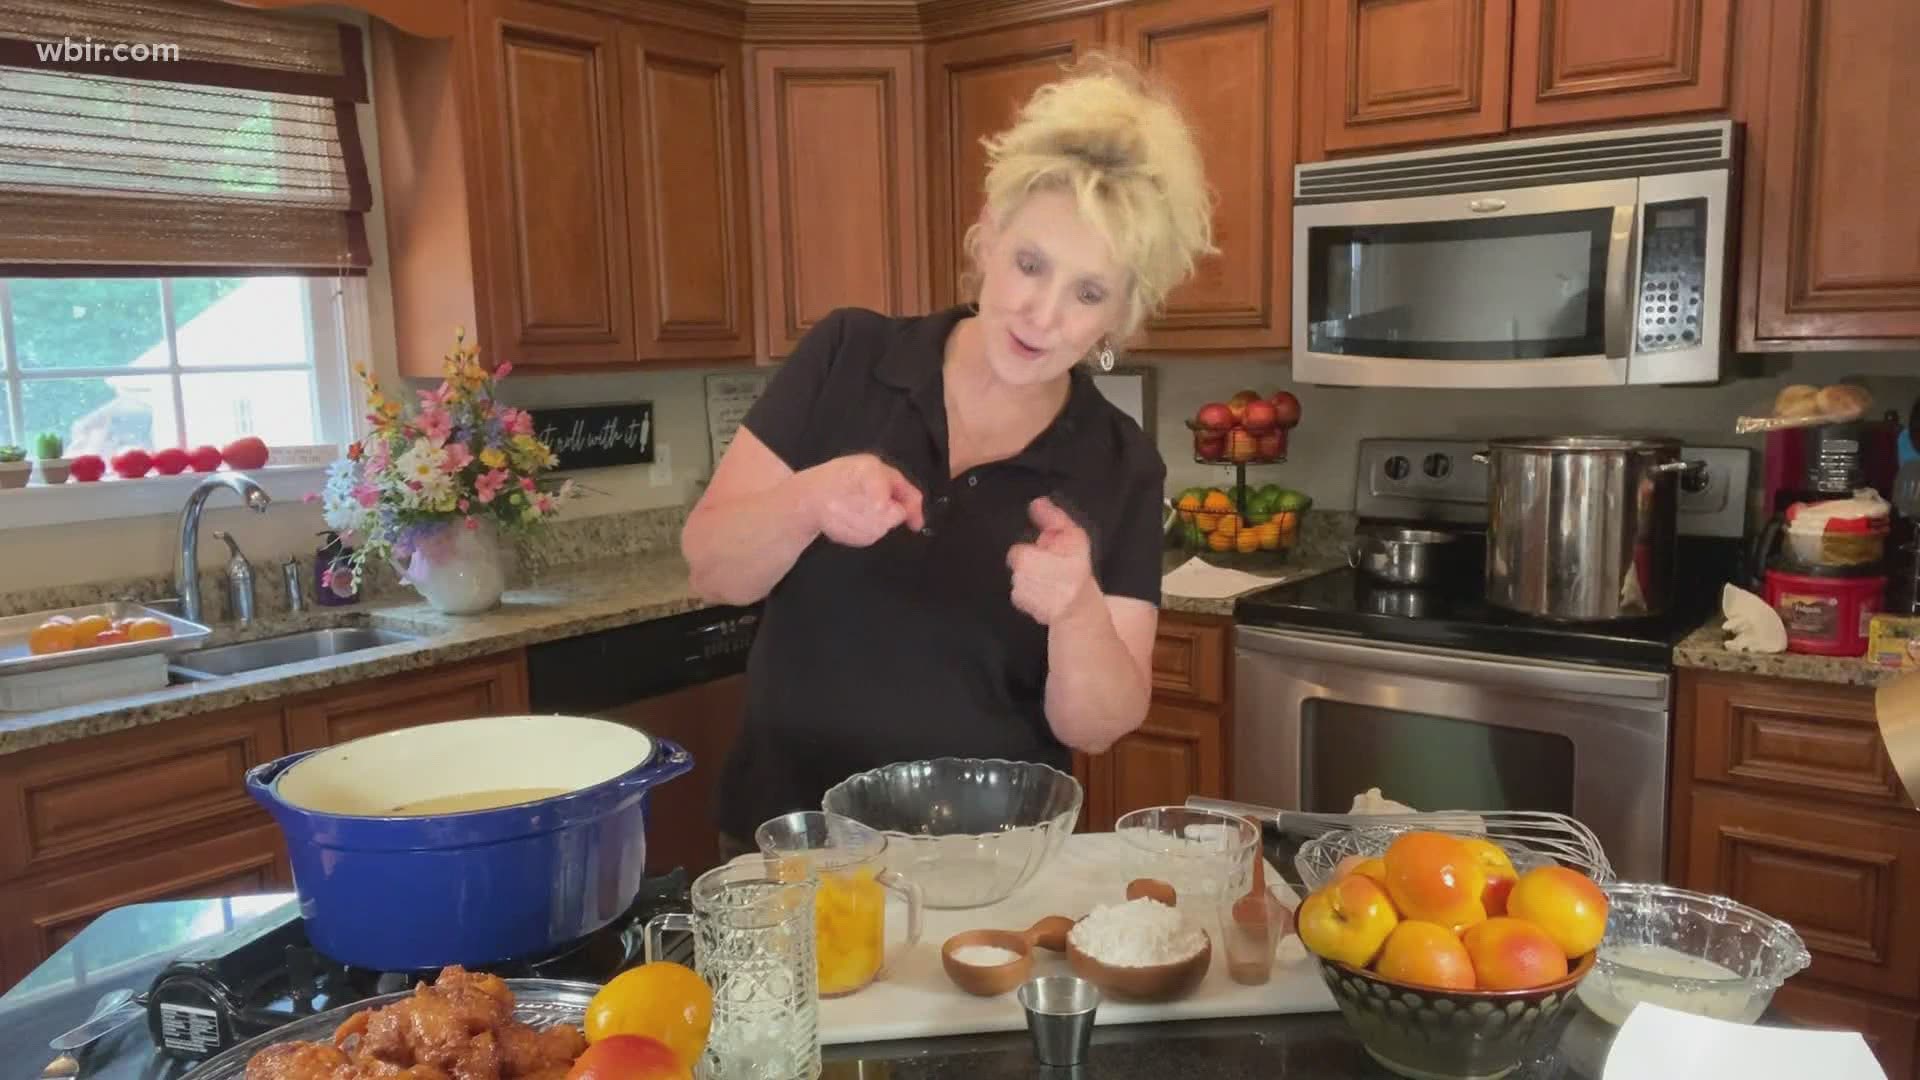 Shona House with Faith Baked Cakes shares a recipe for peach fritters, follow her on Facebook. June 30, 2020-4pm.